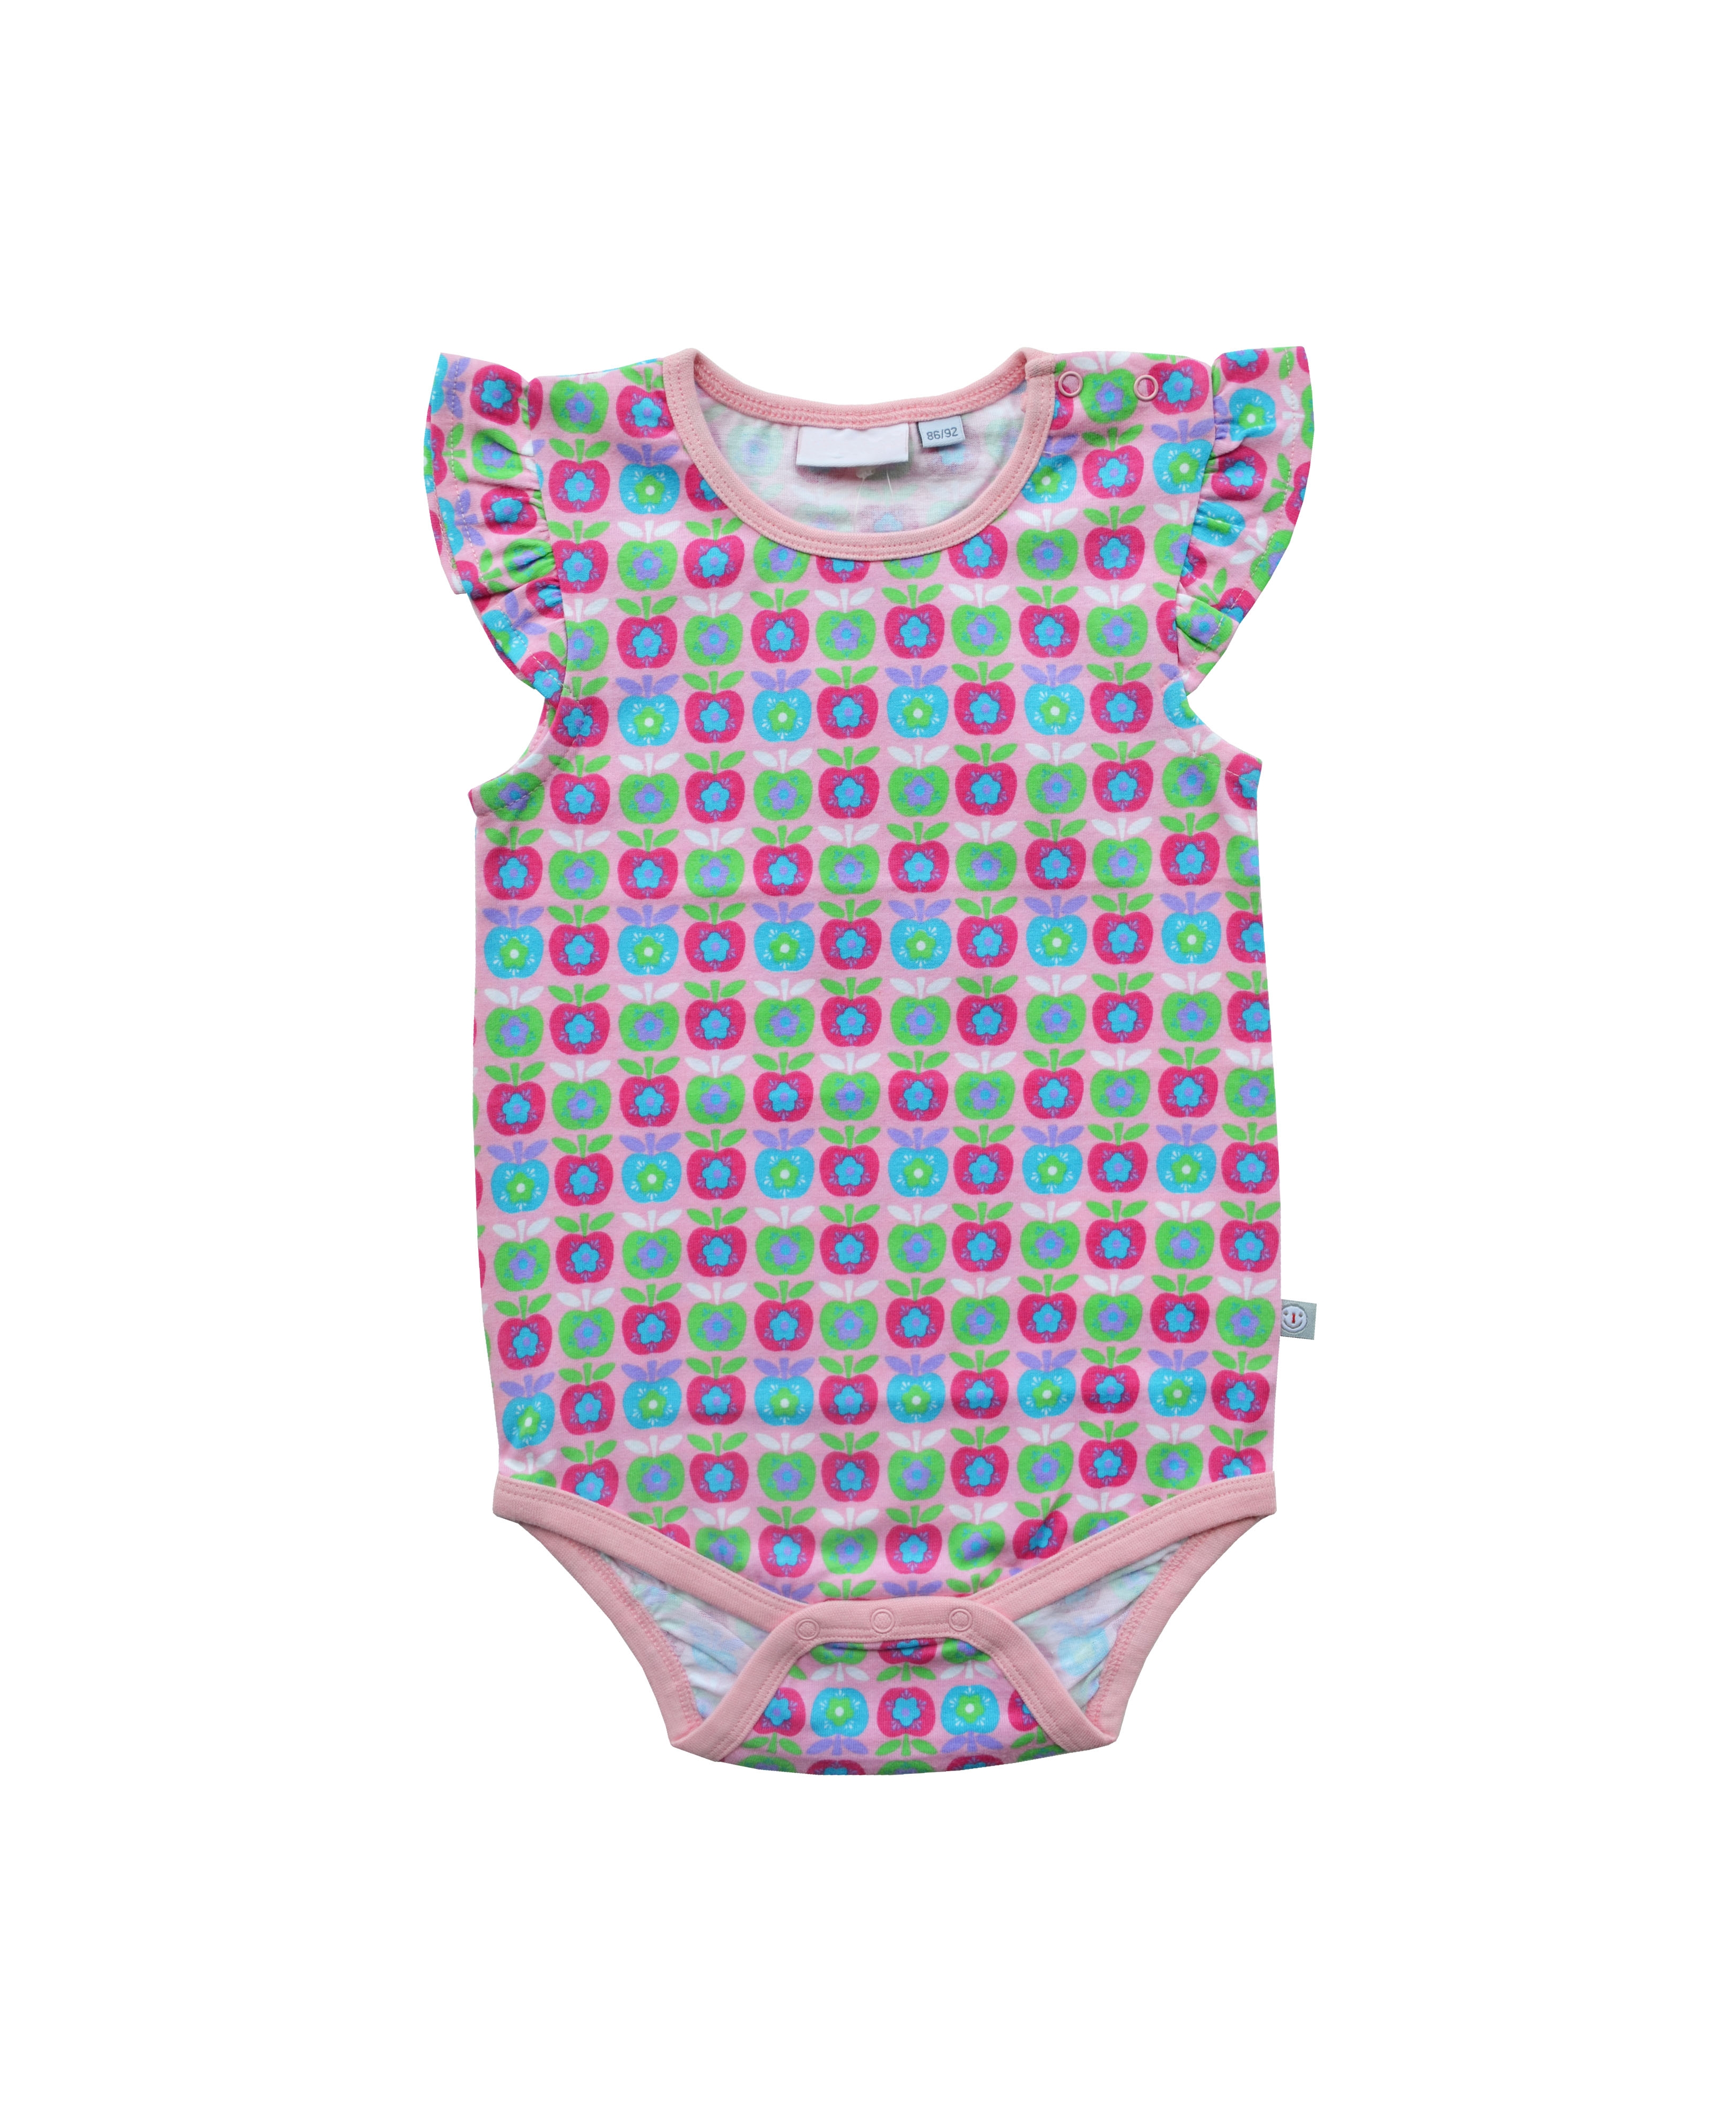 Babeez | Allover Apple Print On Pink Body Button Opening on Shoulder (100% Cotton Jersey) undefined